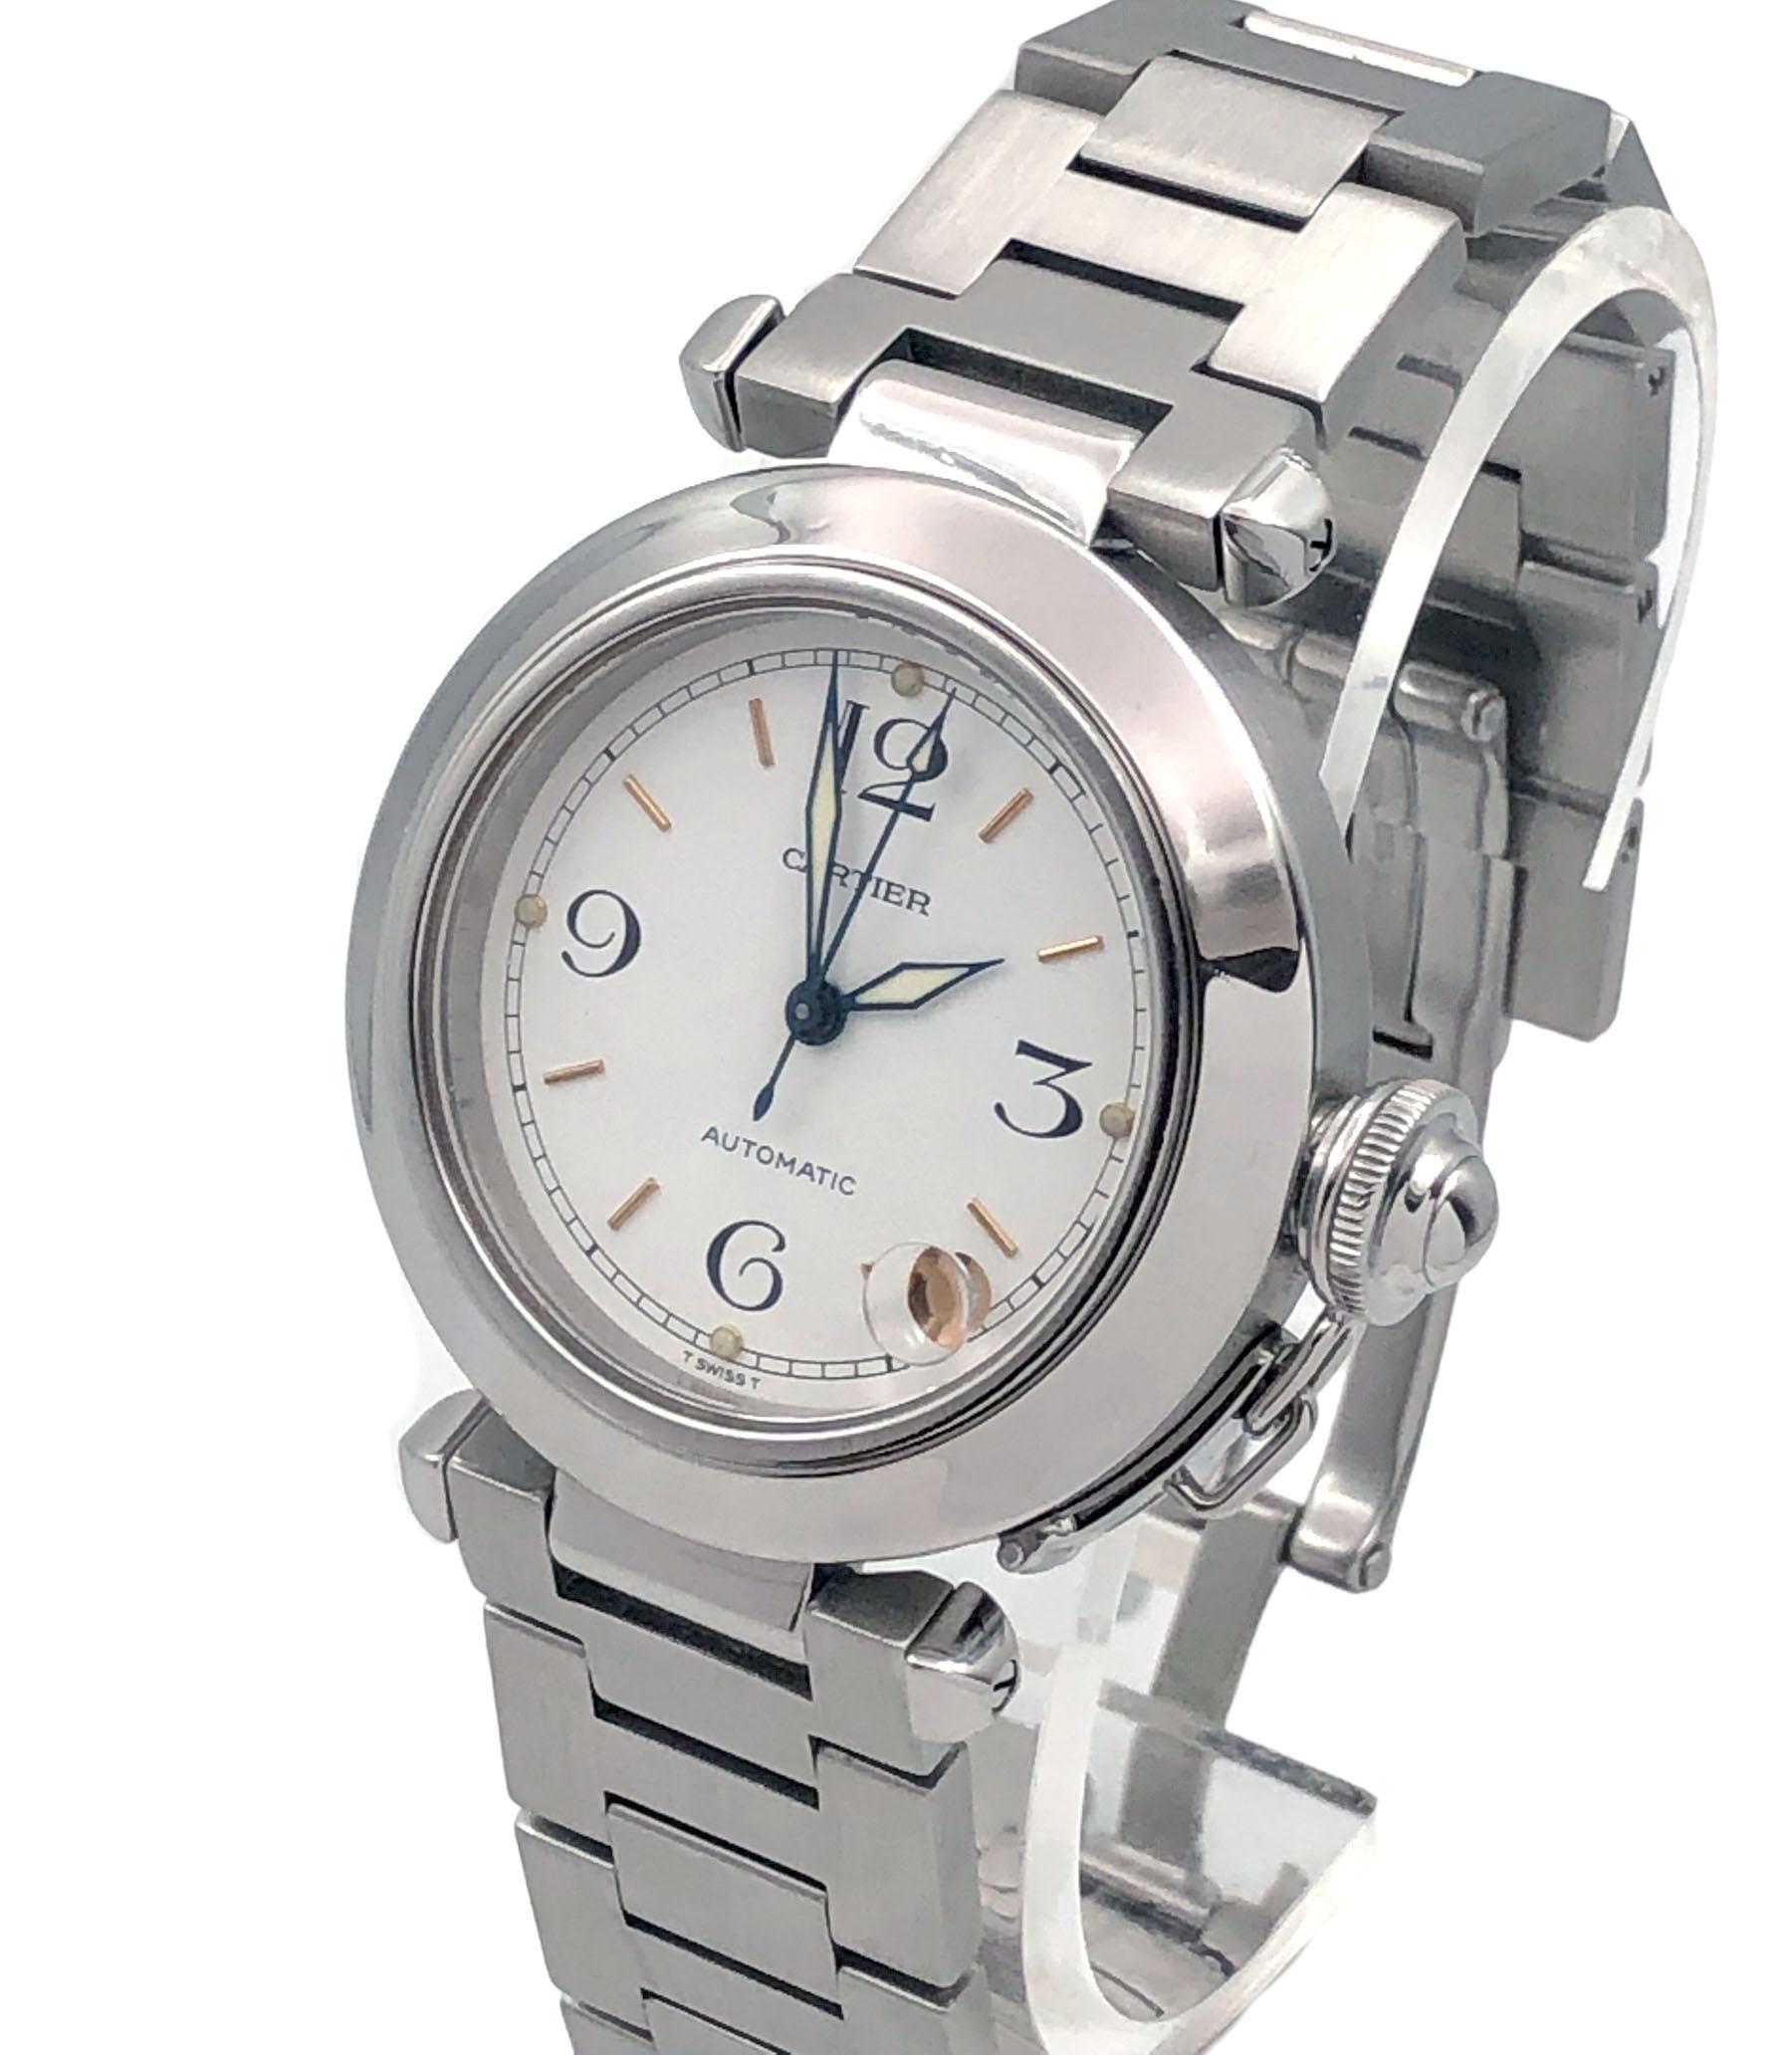 Circa 2005 Cartier Pasha C  2324 Wrist Watch,  35 M.M. Stainless Steel 3 piece water resistant case with watertight lock down Crown. Automatic, self winding movement. White dial with Calendar window at the 5 position and a sweep seconds hand. 3/4